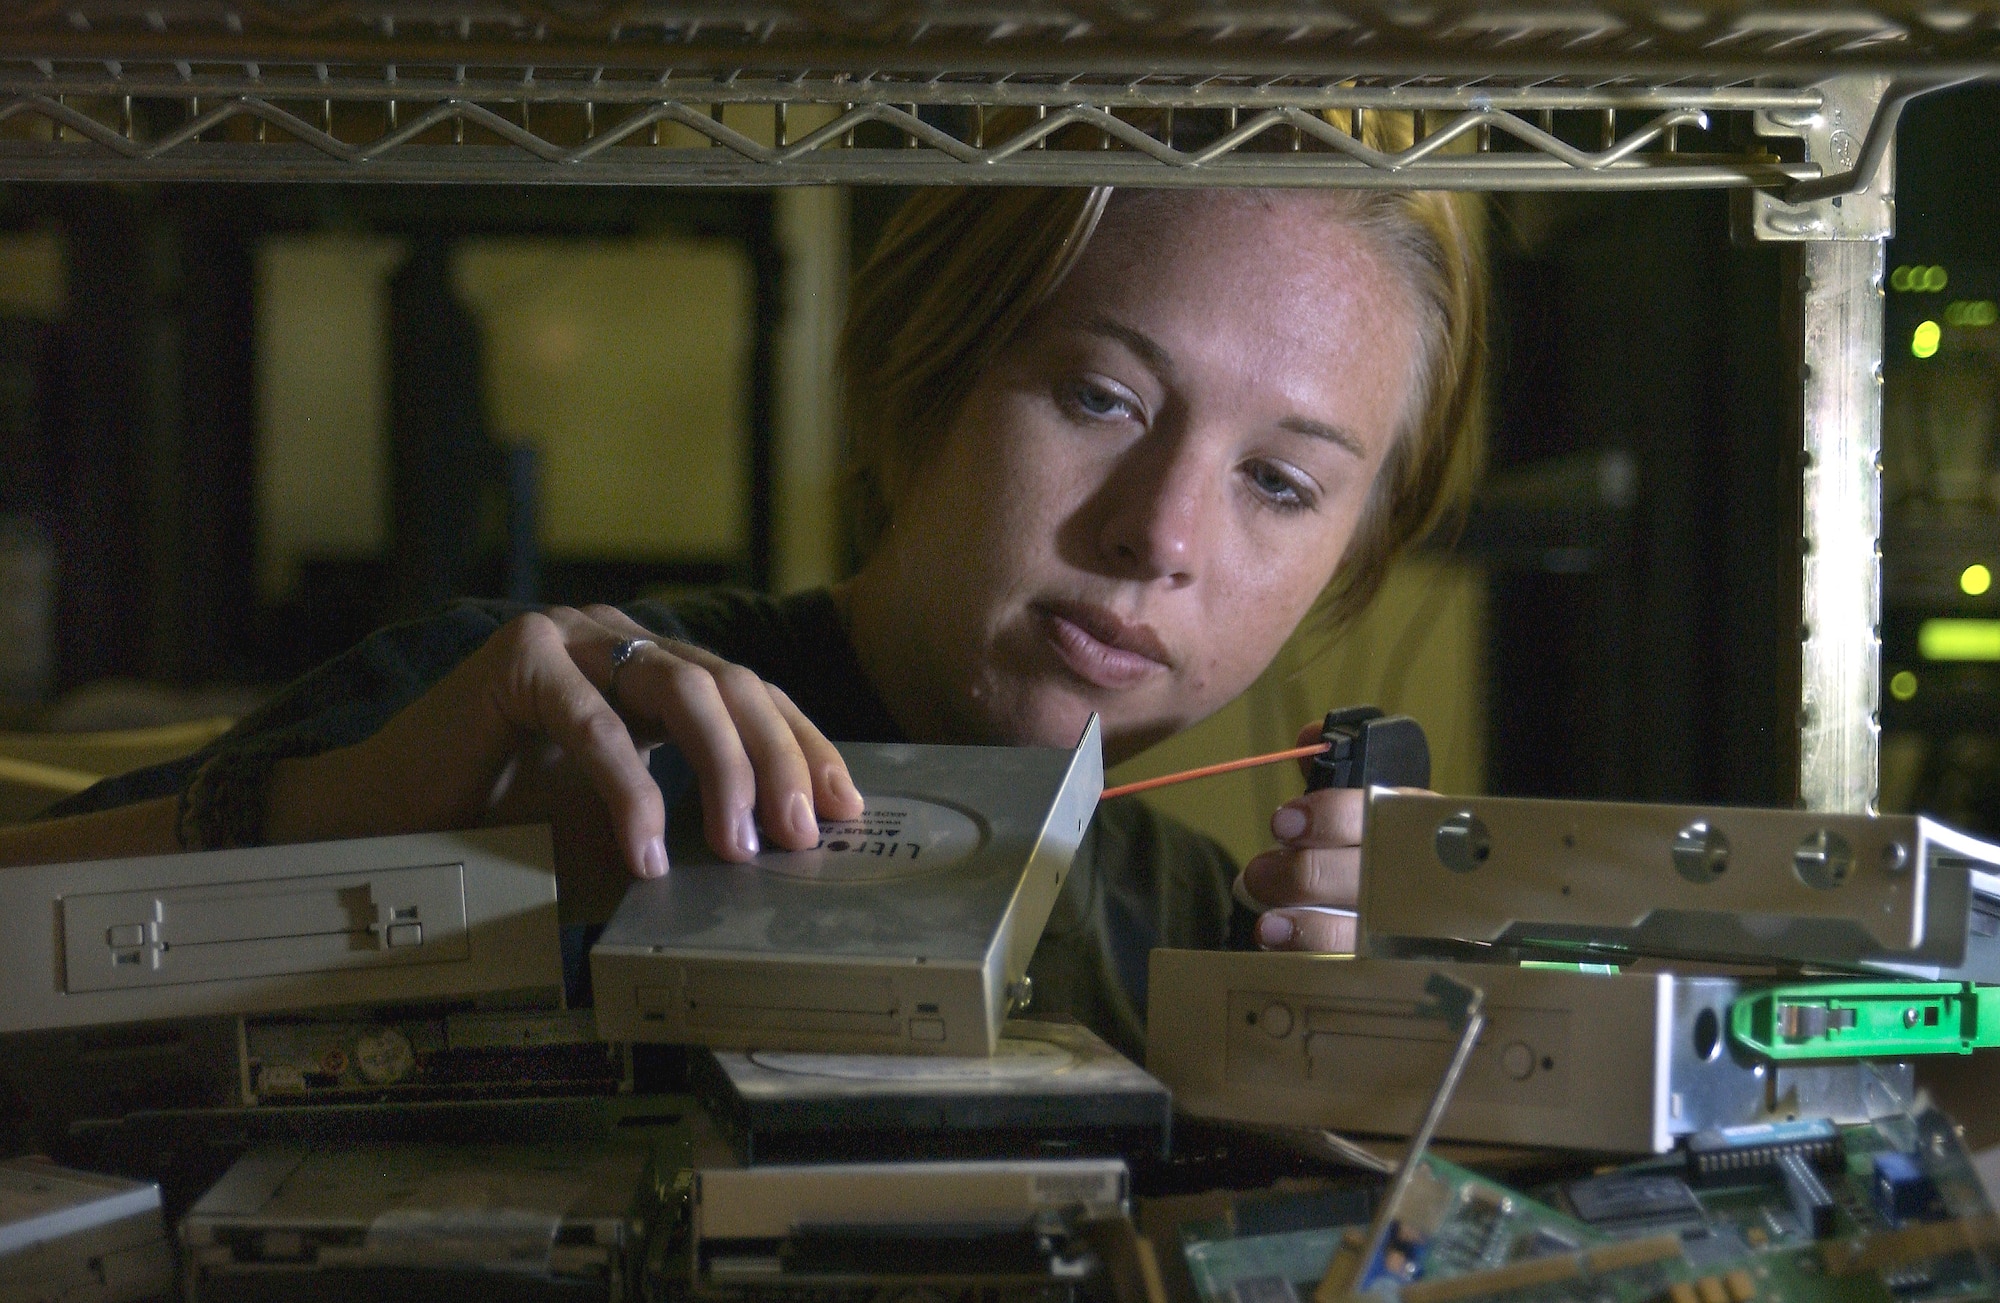 BAGHDAD INTERNATIONAL AIRPORT, Iraq -- Staff Sgt. Karen Riley works to salvage a working hard drive to rebuild a computer by taking apart each computer to test its internal components.  When enough working components are found, she pieces together a like-new computer.  She is deployed here as part of the 447th Expeditionary Communication Squadron, which is responsible for running the network control center and keeping the Air Force in Baghdad online.  Riley is a computer maintenance technician from the 22nd Communications Squadron at McConnell Air Force Base, Kan.  (U.S. Air Force photo by Master Sgt. Keith Reed)